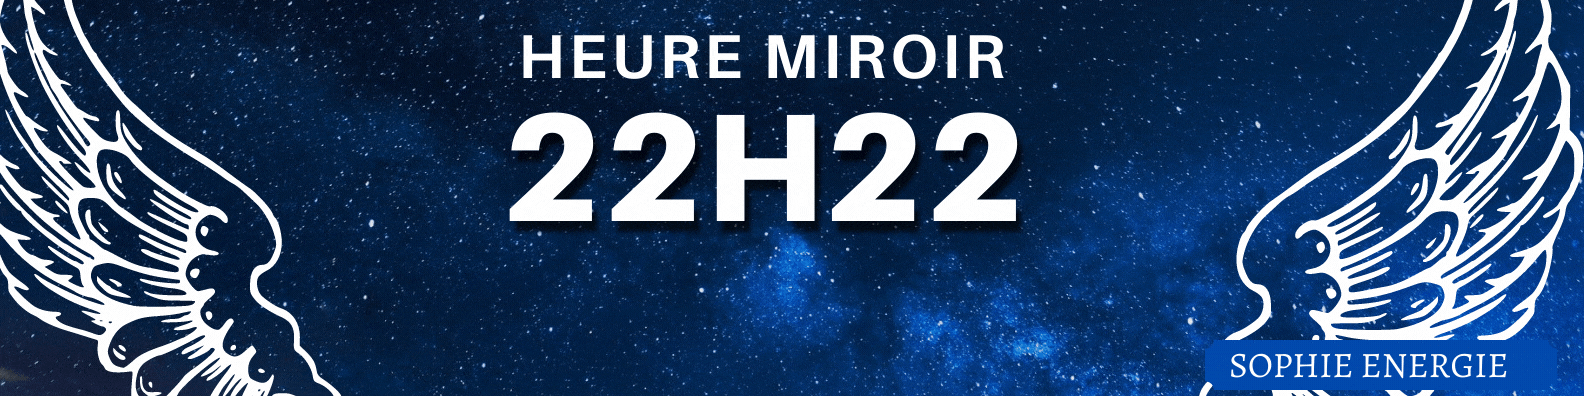 HEURE MIROIR anges 22h22